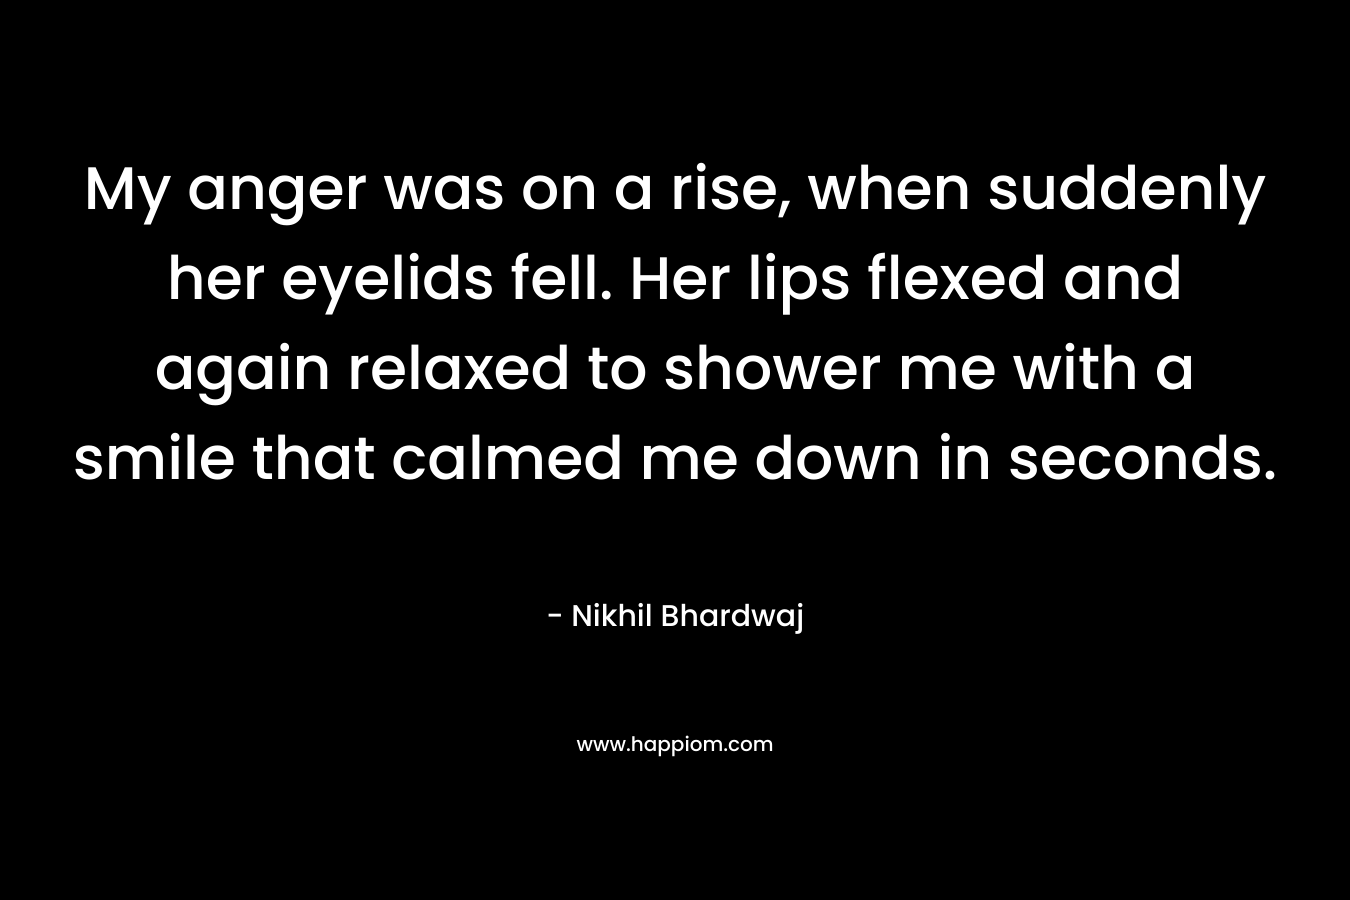 My anger was on a rise, when suddenly her eyelids fell. Her lips flexed and again relaxed to shower me with a smile that calmed me down in seconds.